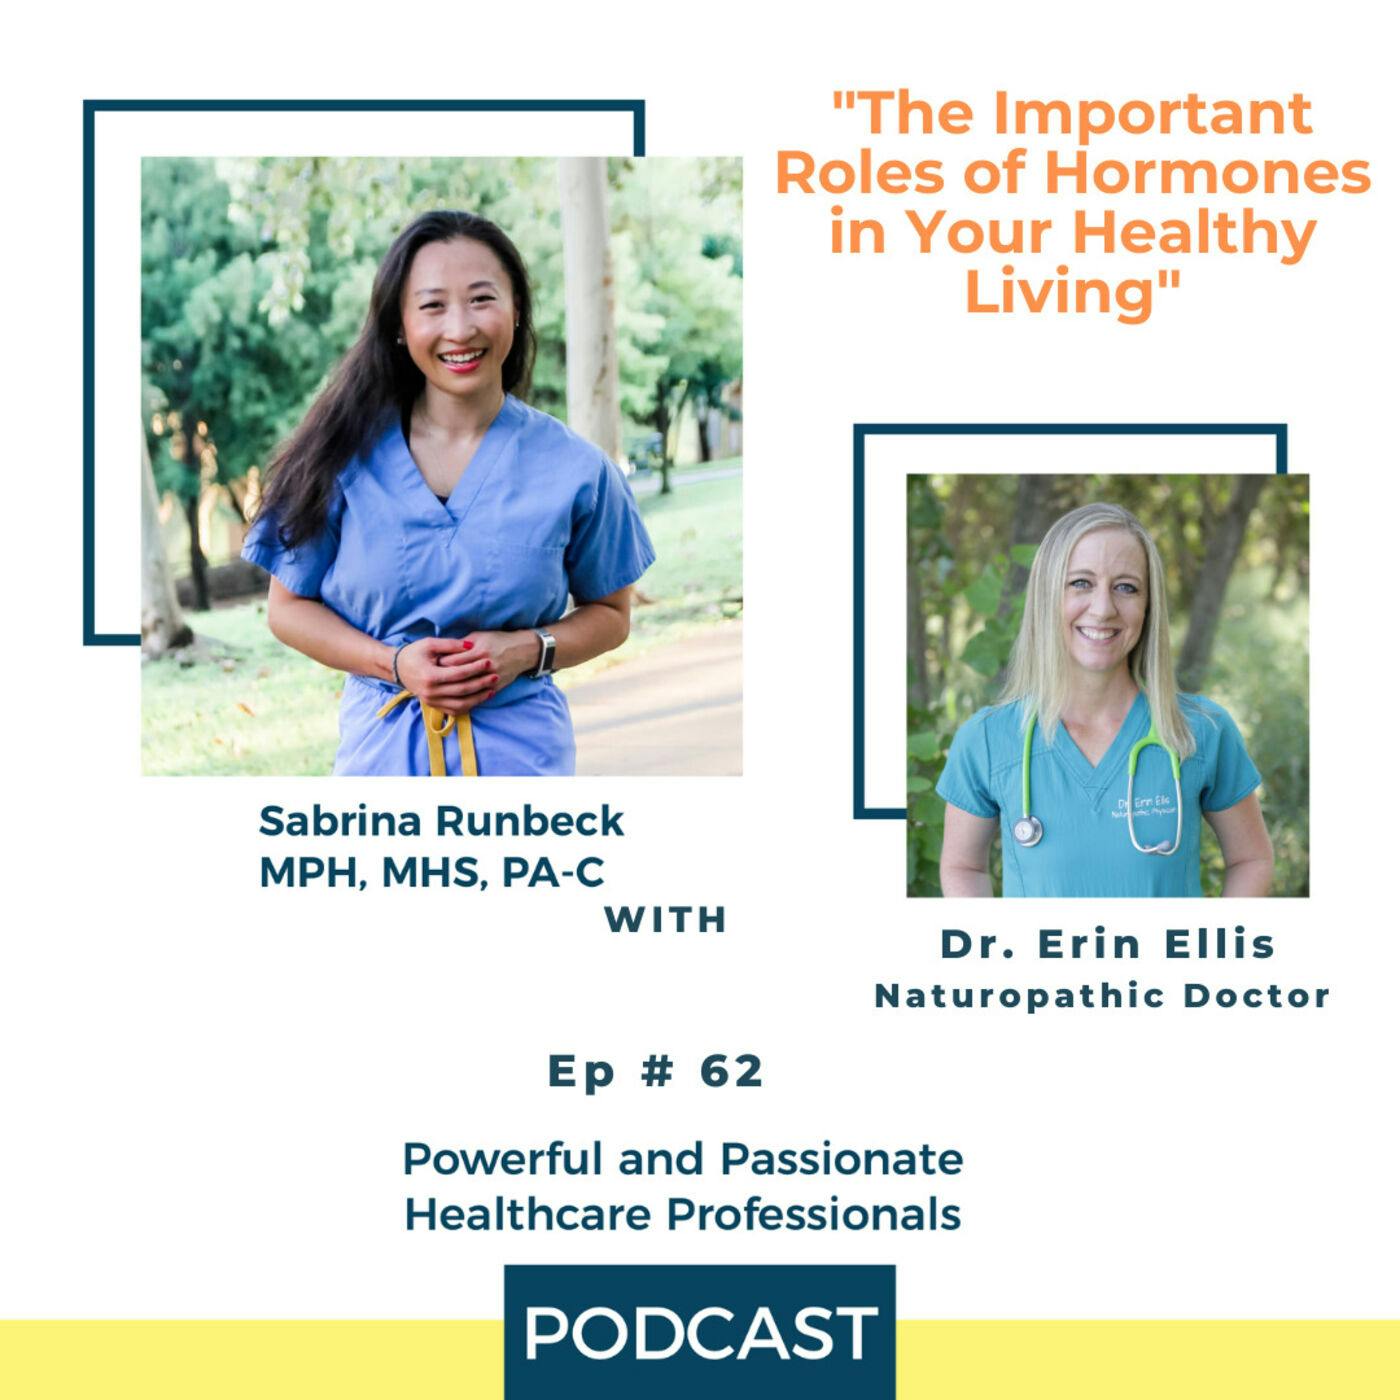 Ep 62 – The Important Roles of Hormones in Your Healthy Living with Dr. Erin Ellis